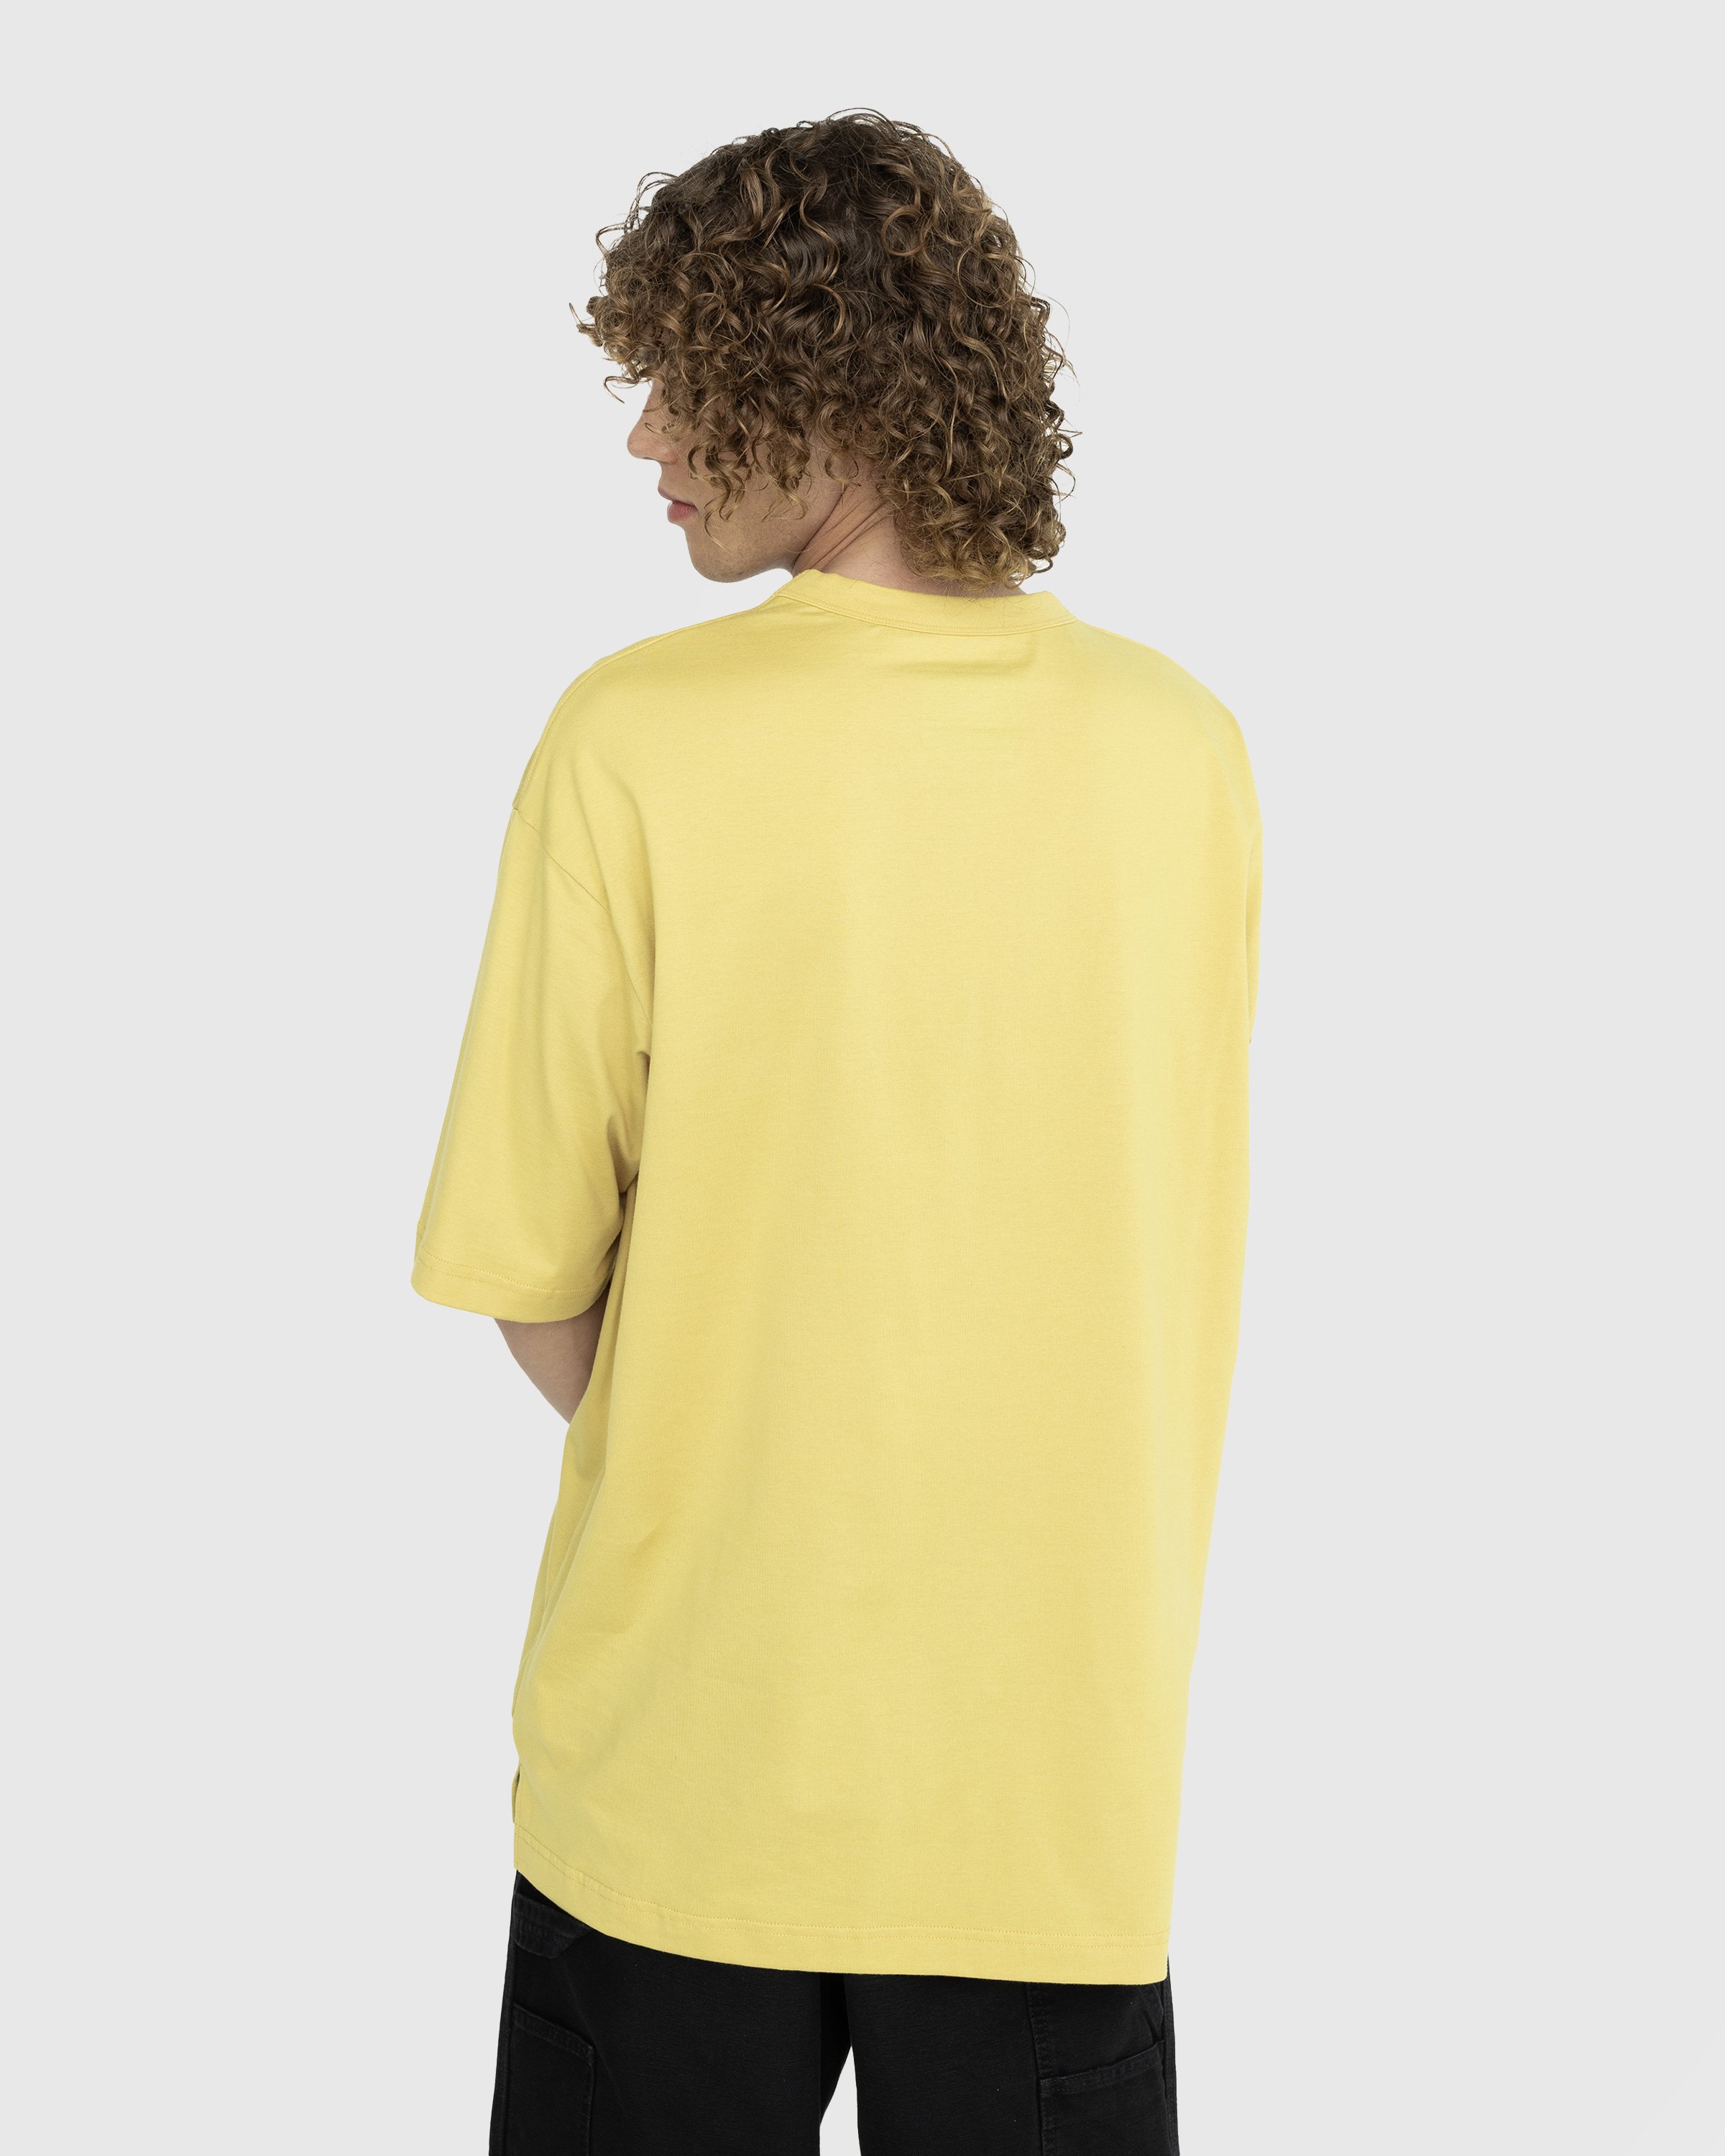 Y-3 - Tokyo T-Shirt Blanch Yellow - Clothing - Yellow - Image 3